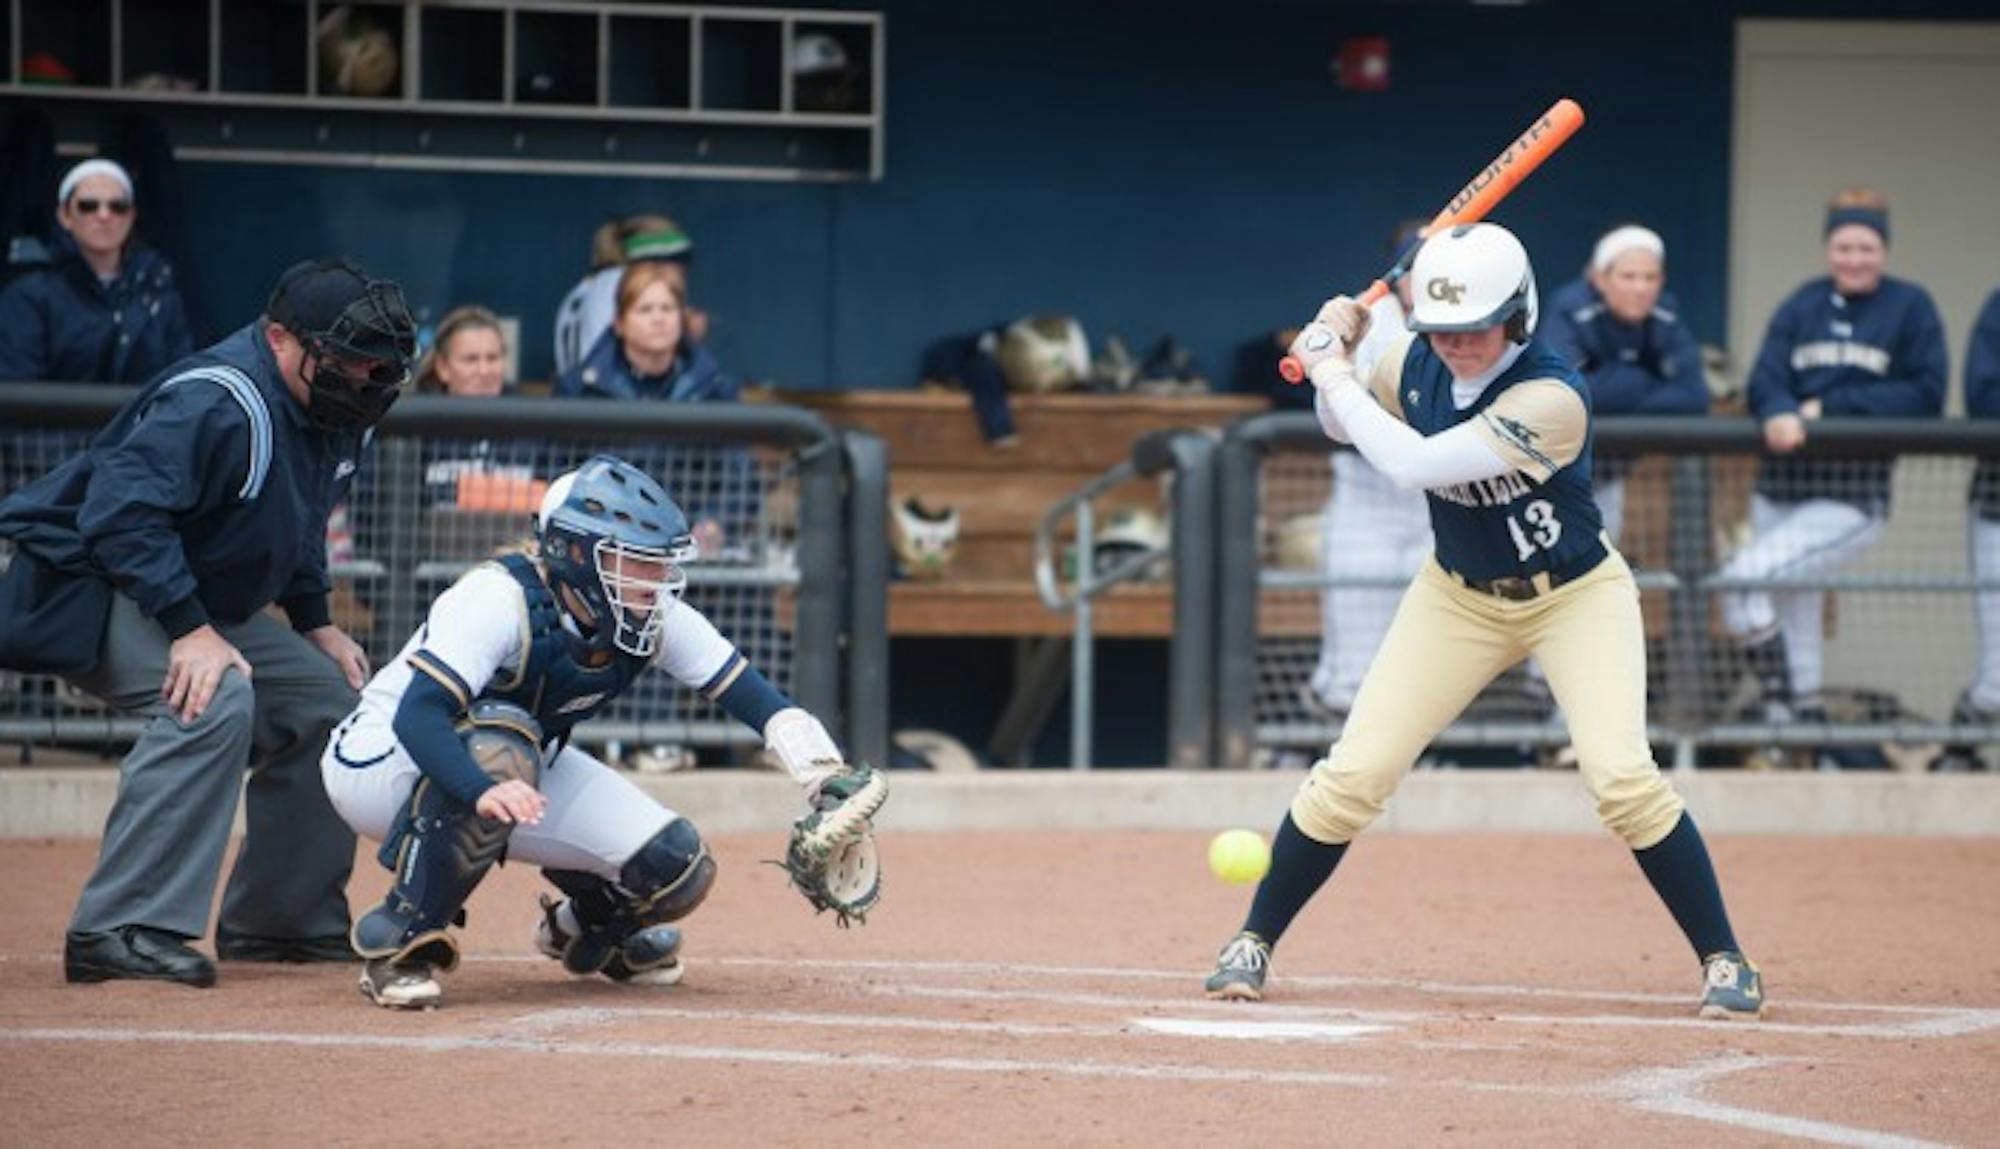 Irish senior catcher Cassidy Whidden handles a low pitch during Notre Dame's doubleheader against Georgia Tech March 21 at Melissa Cook Stadium. Notre Dame won both games, 6-1 and 13-0, respectively.